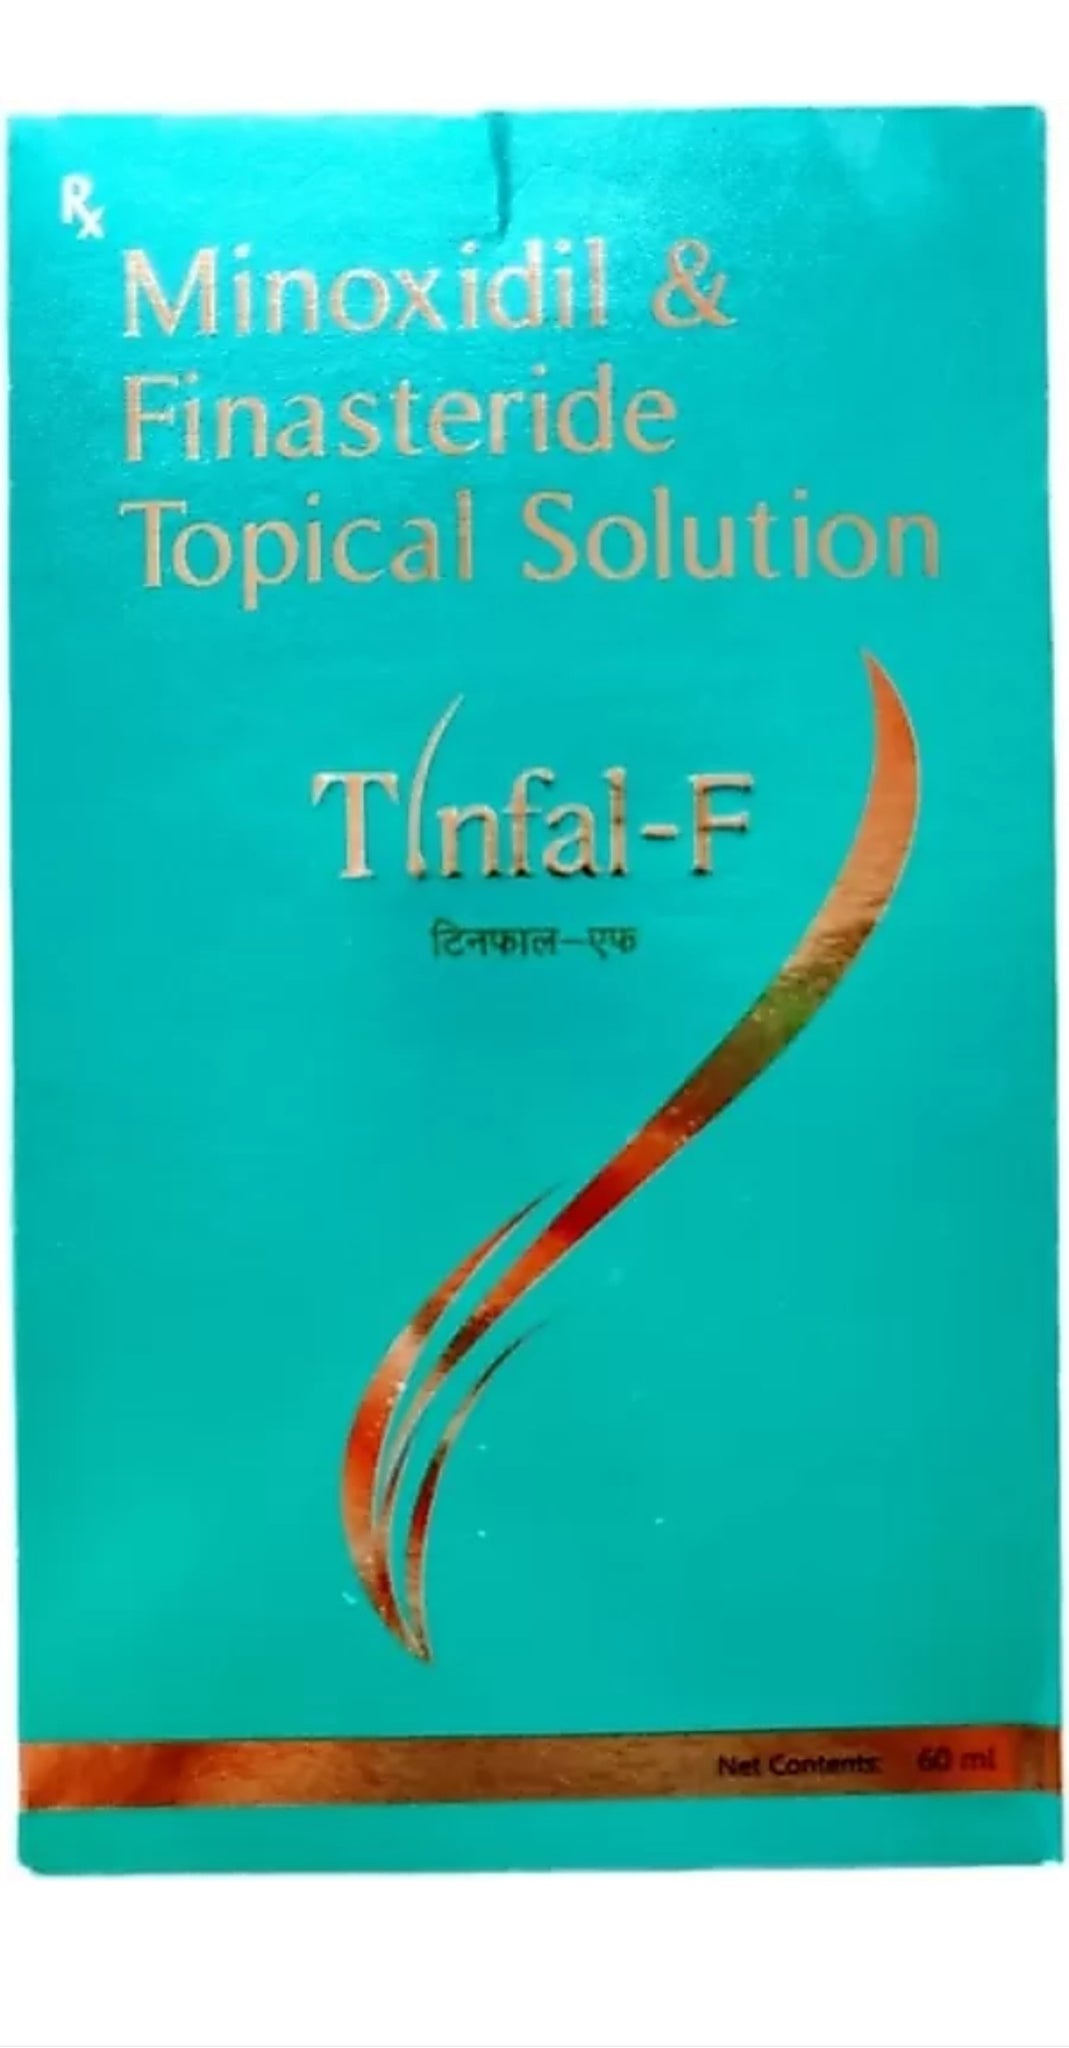 Buy Leeford Tinfal 5 Topical Solution 60 ml Online  399 from ShopClues